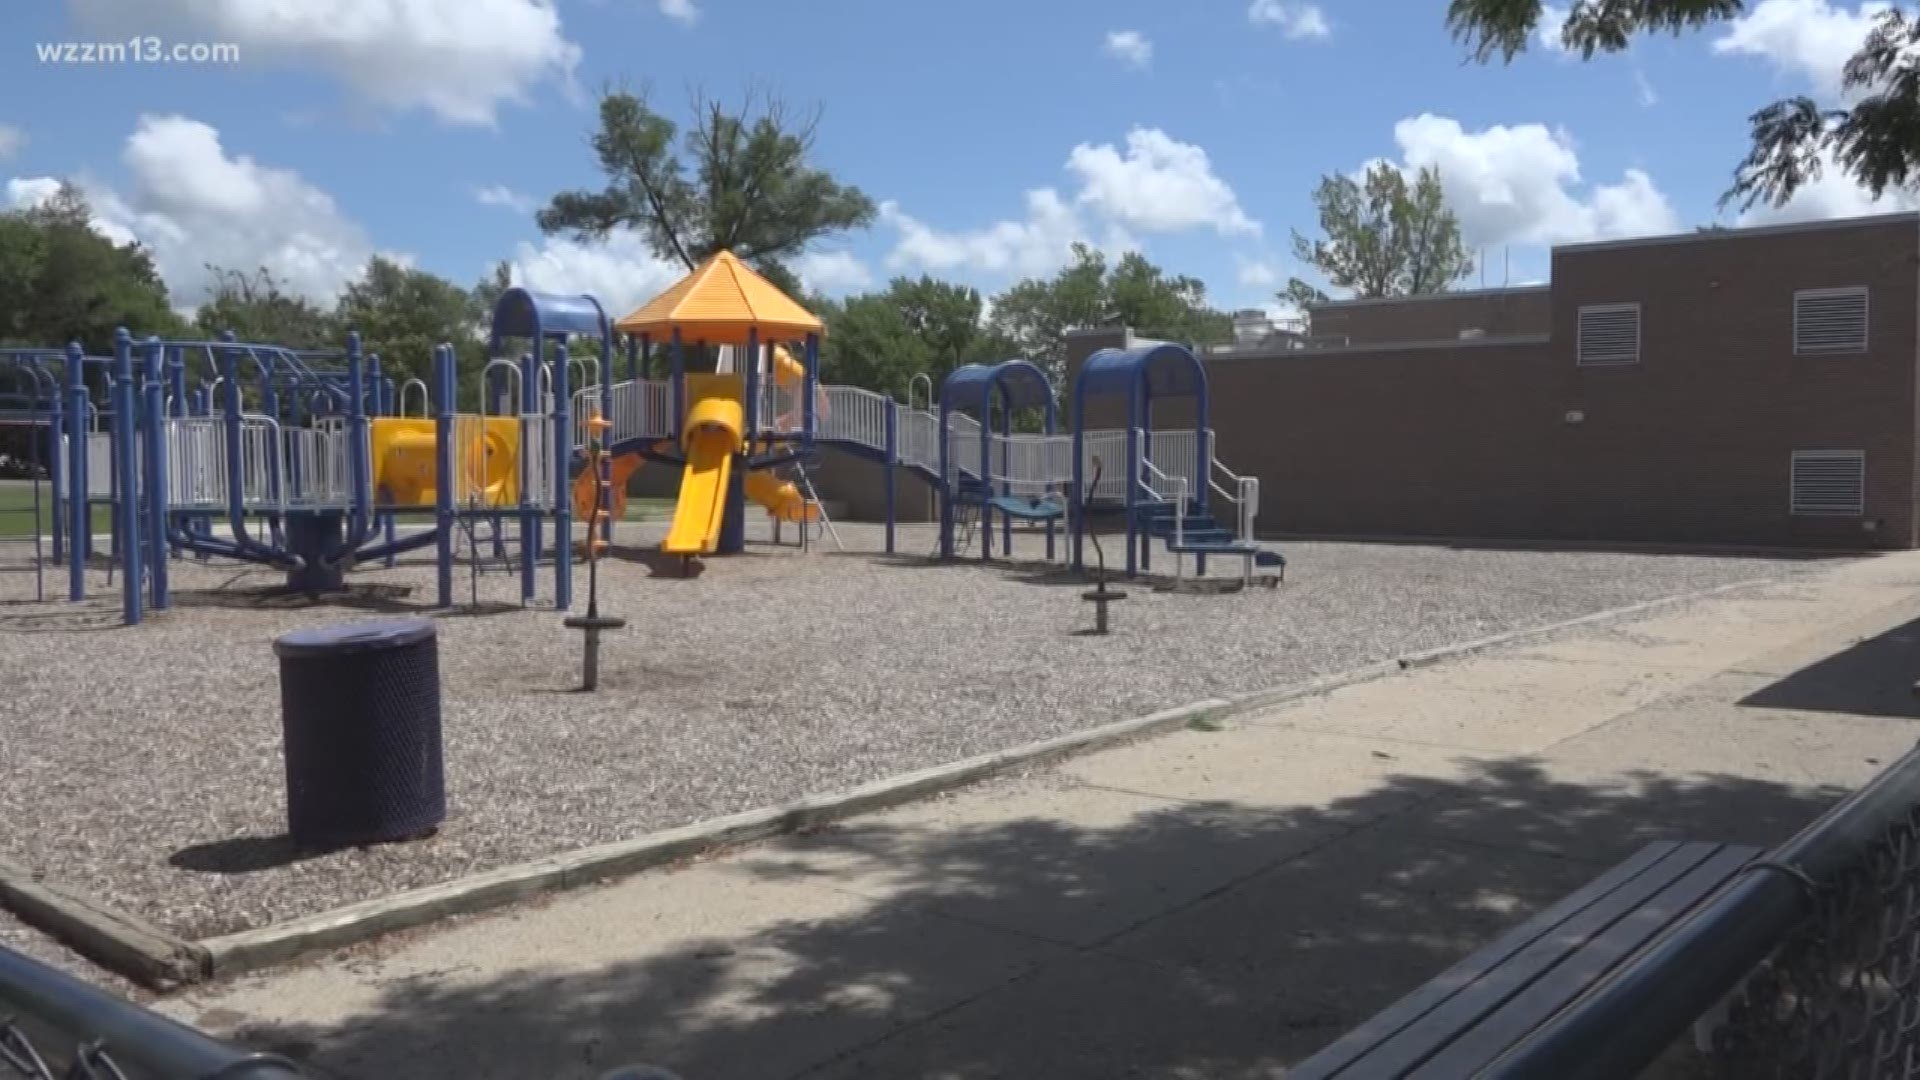 Holland preschool is being sued after child hurt on jungle gym